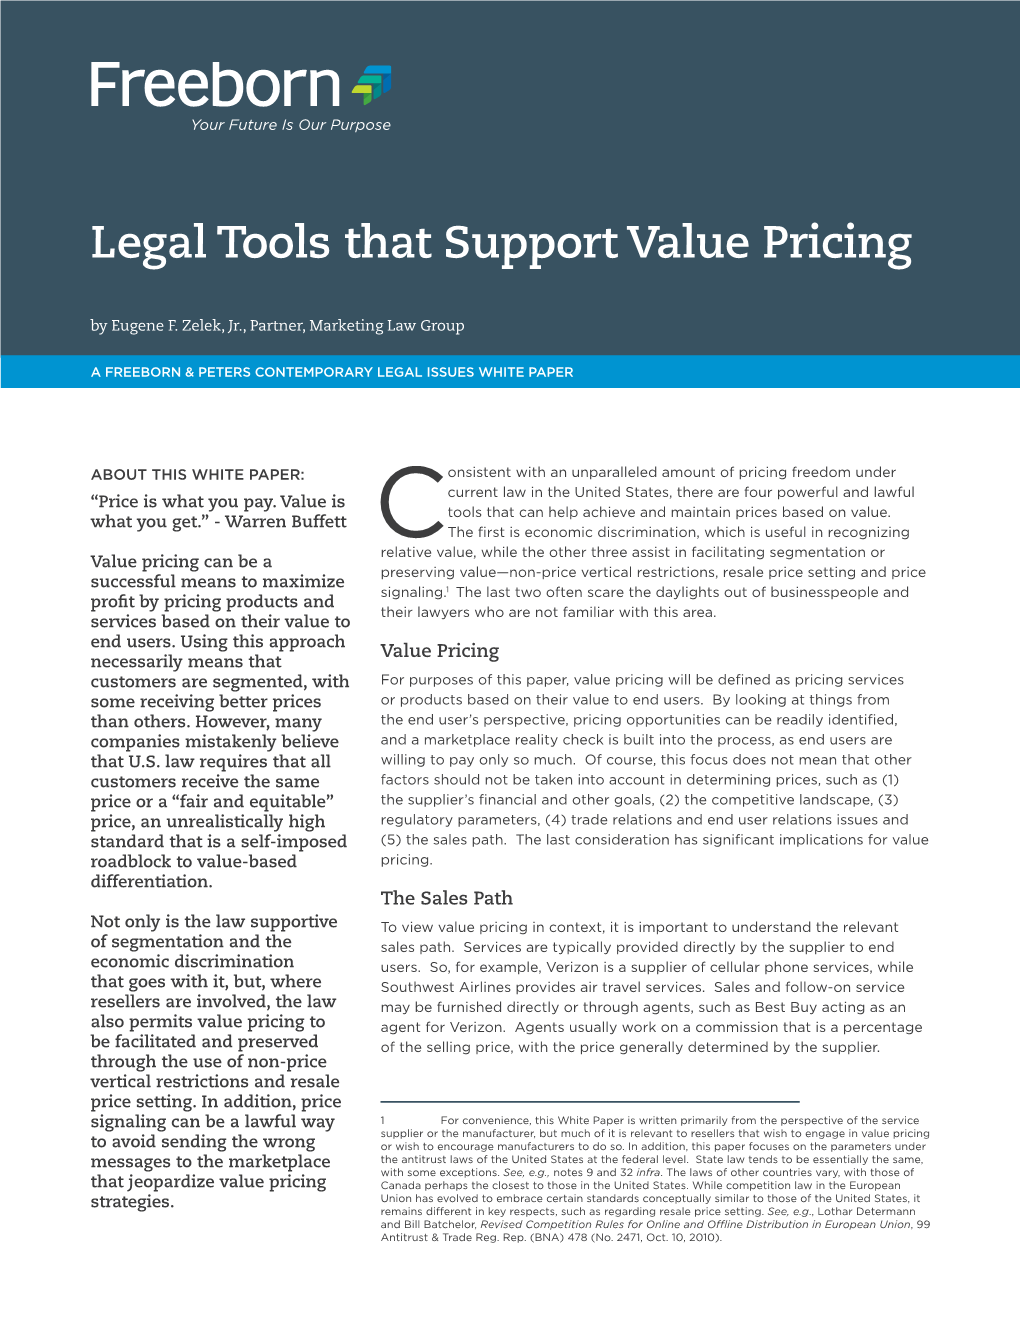 Legal Tools That Support Value Pricing